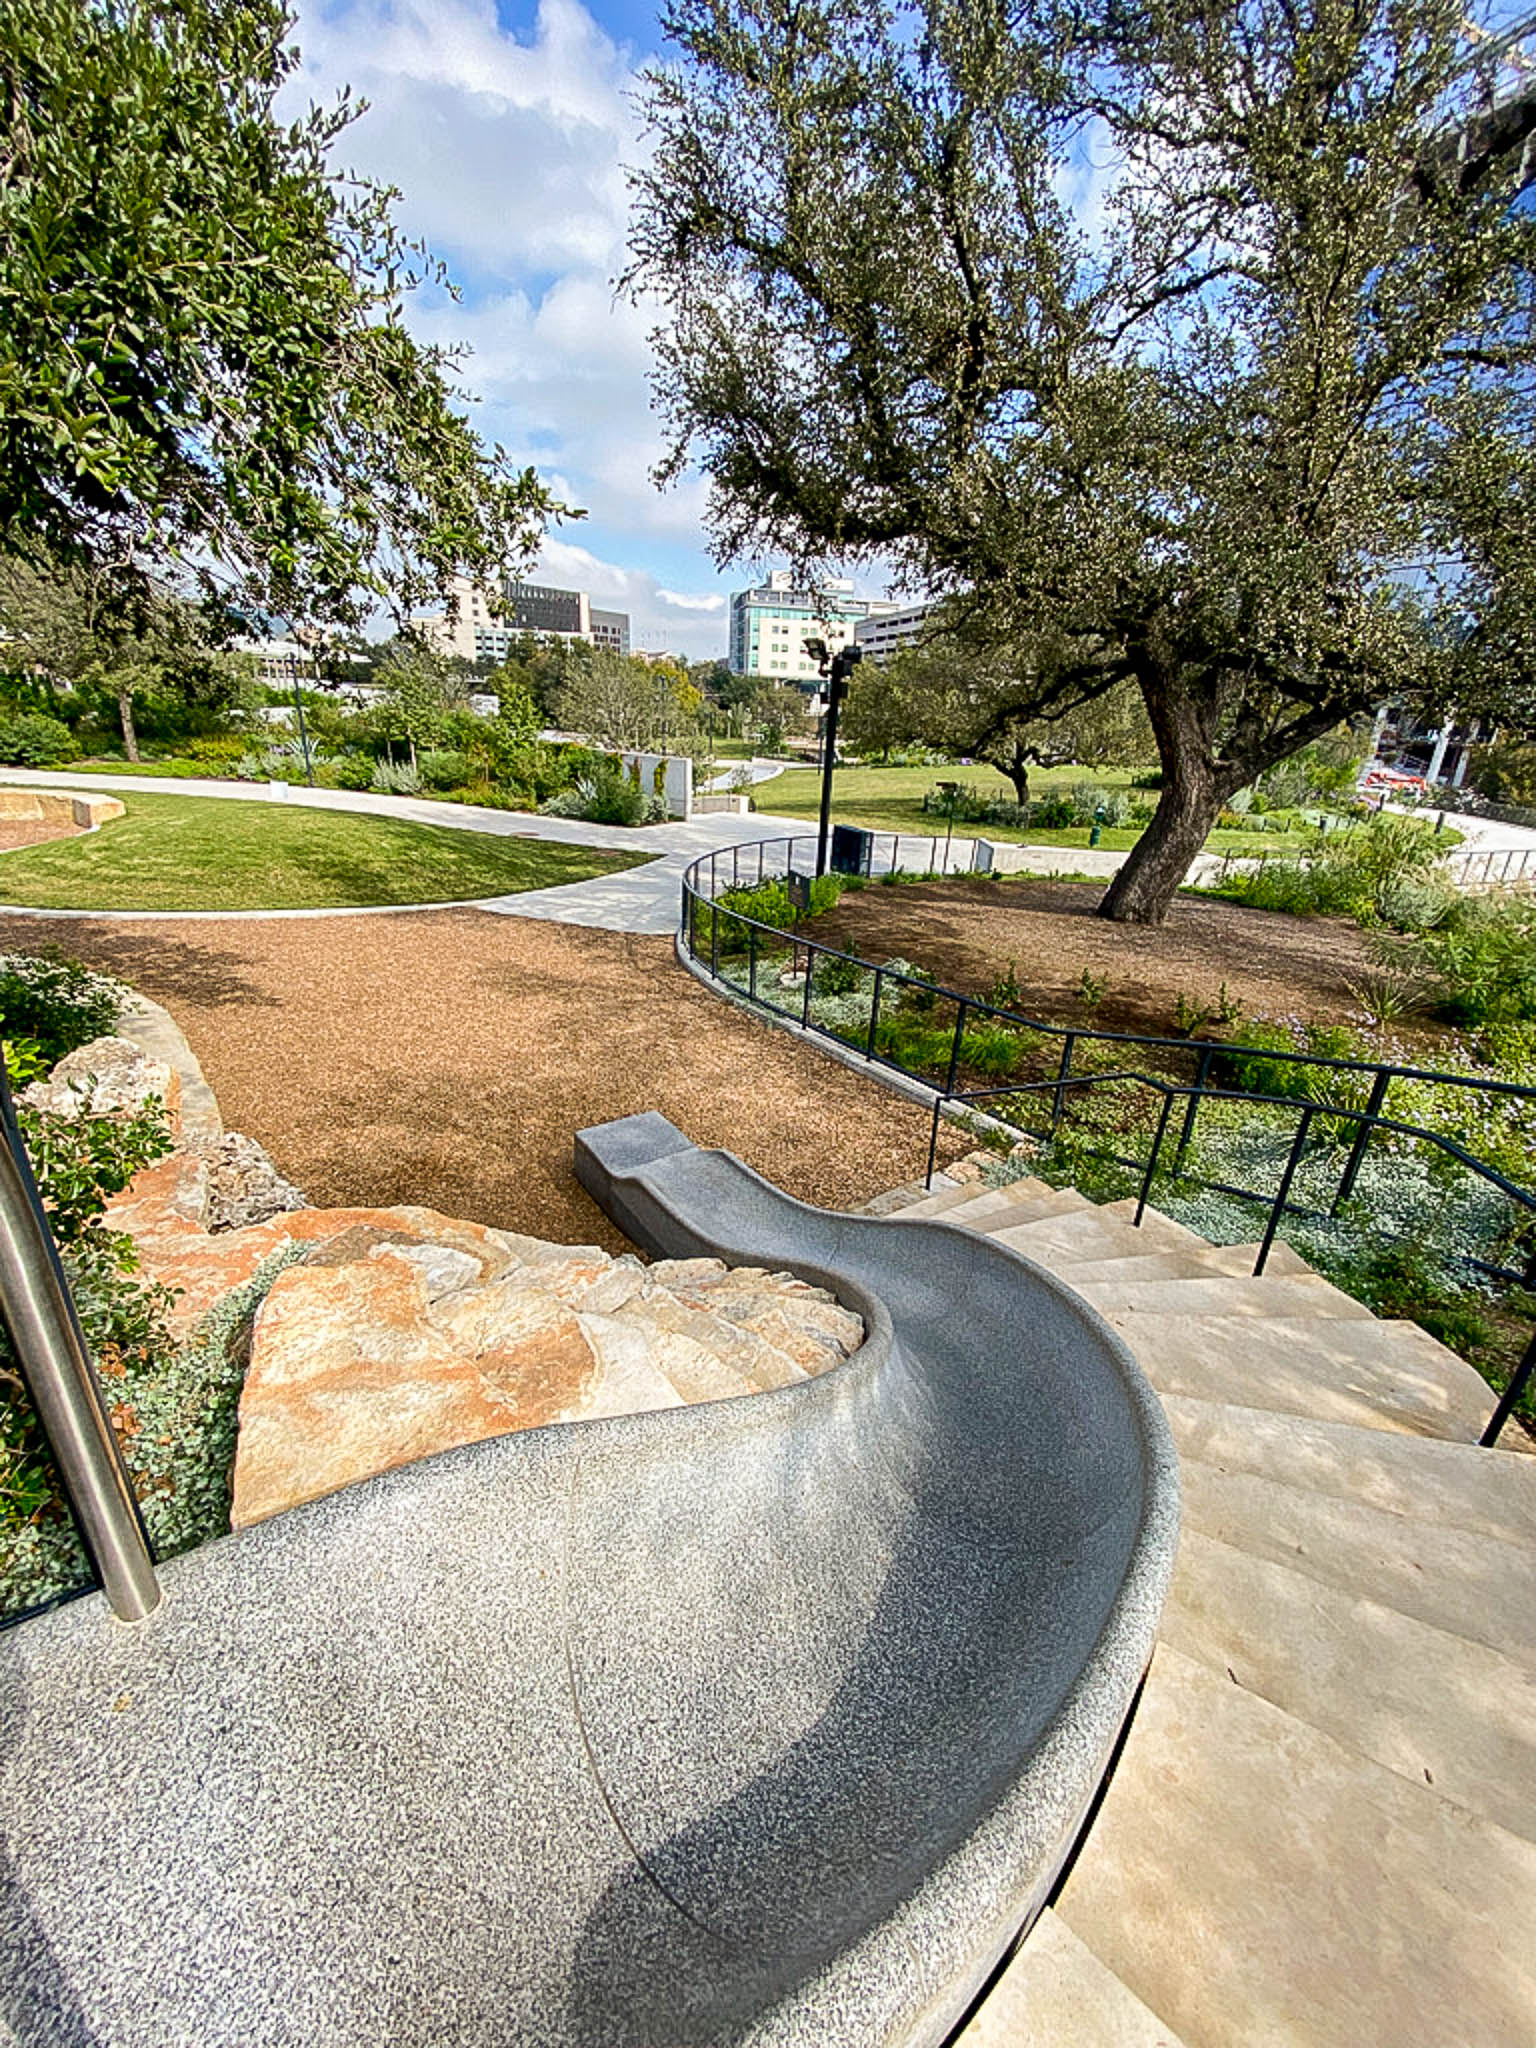 CEMENT SLIDE AT WATERLOO GREENWAY - 101 free things to do in ATX!